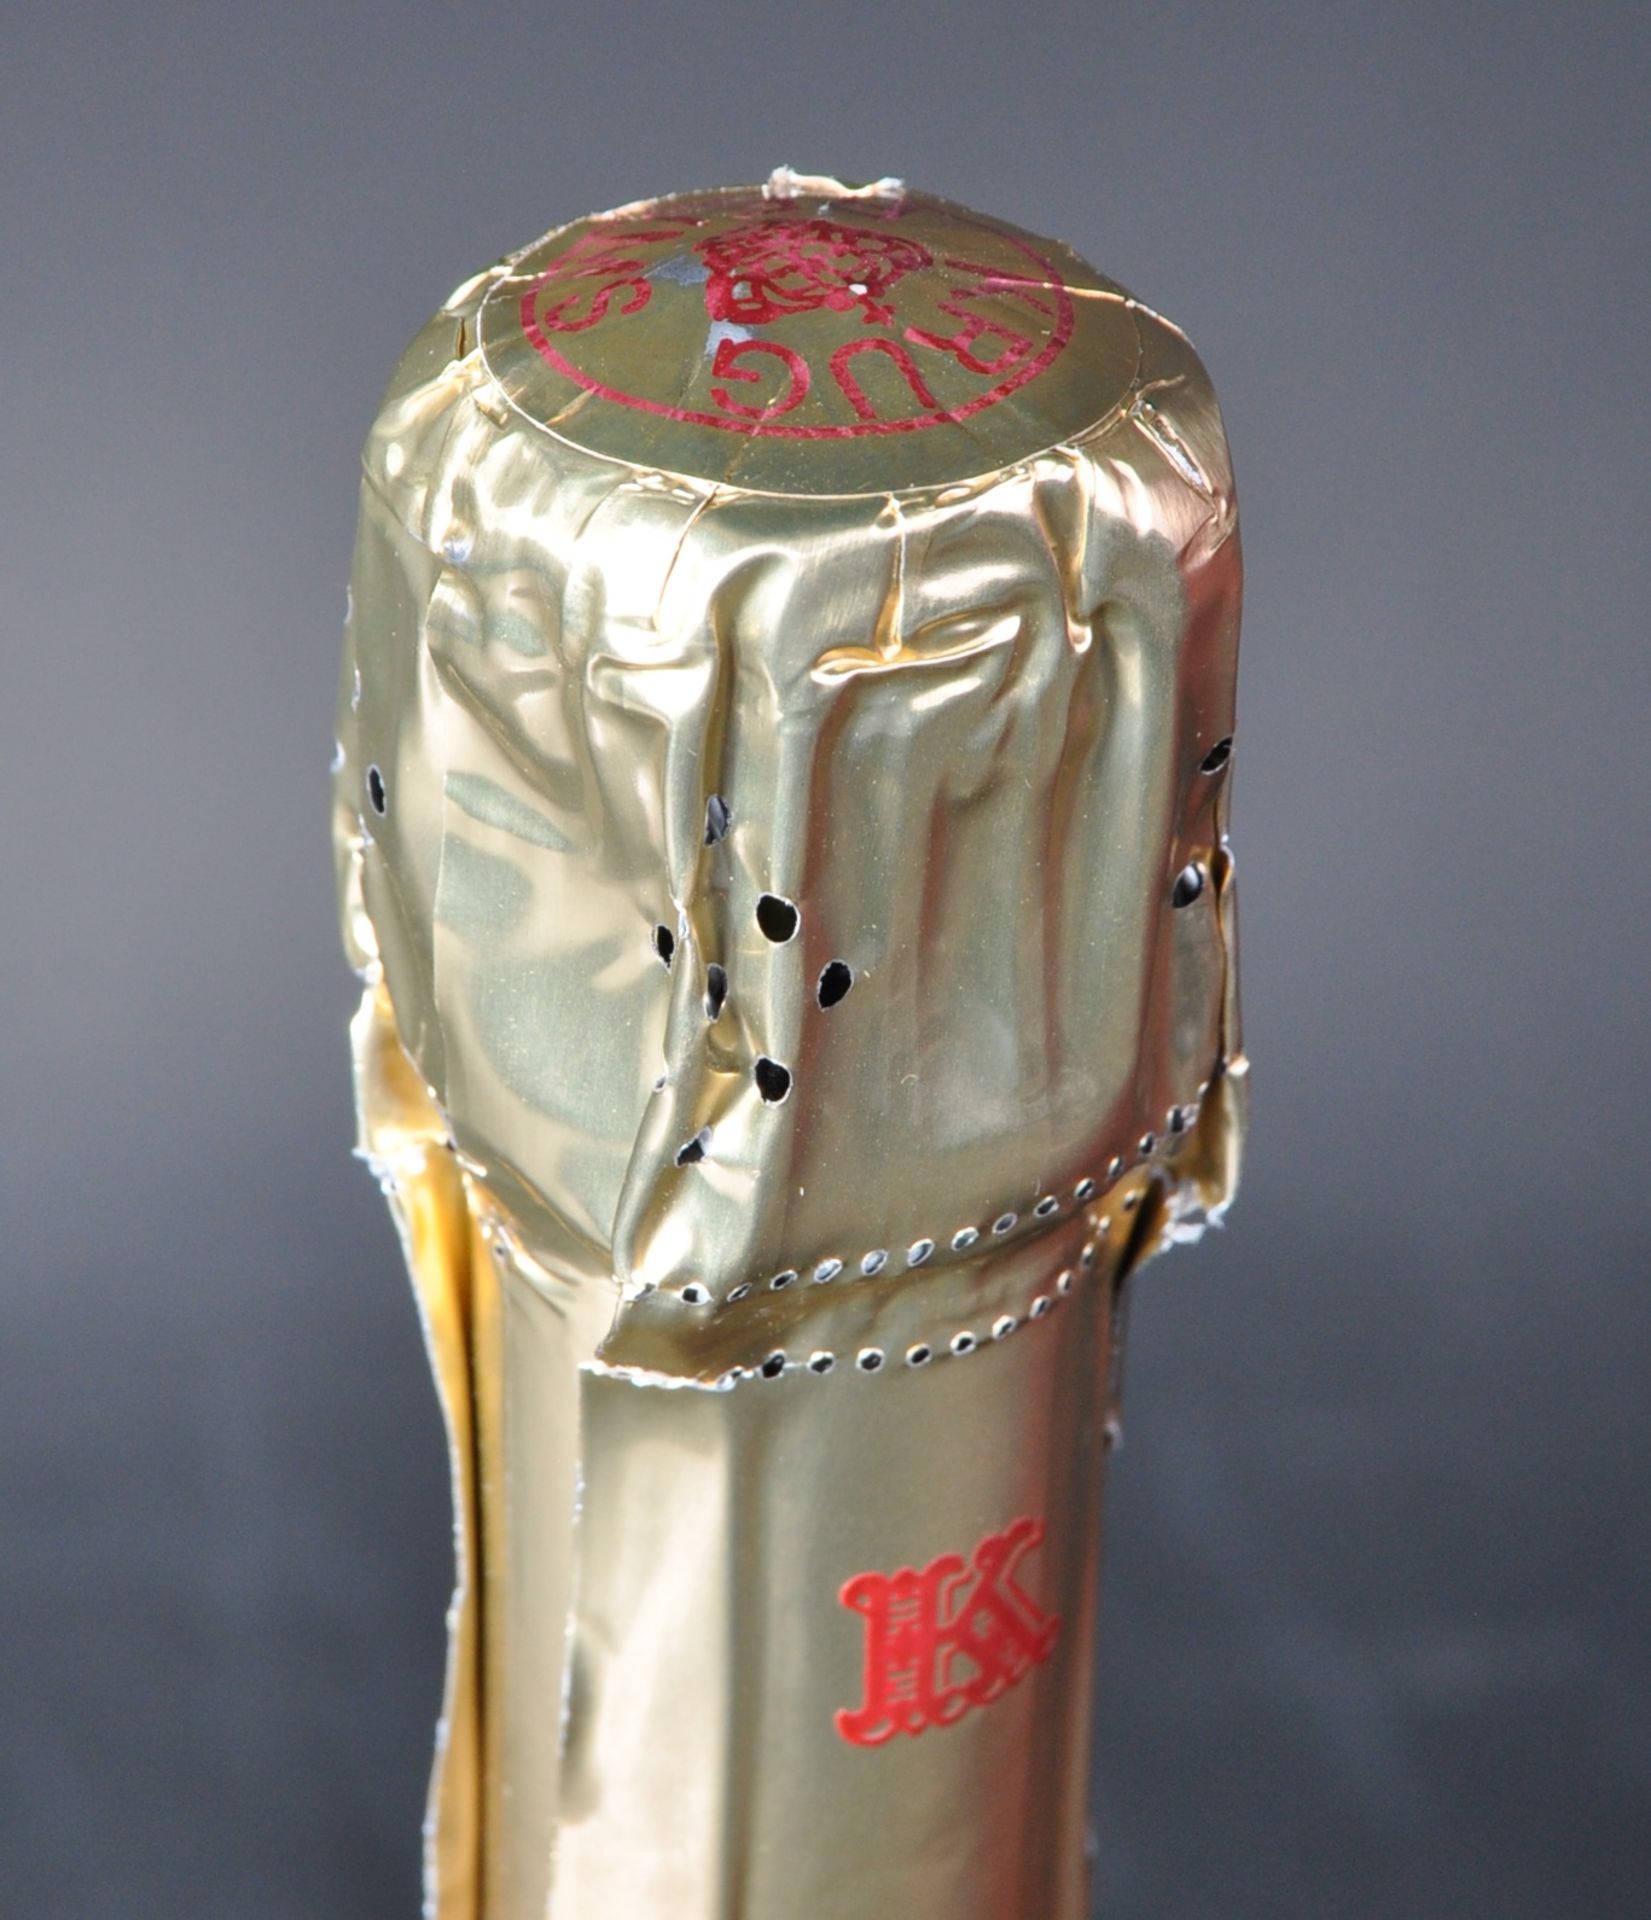 BOXED BOTTLE OF KRUG FRENCH CHAMPAGNE - Image 2 of 2